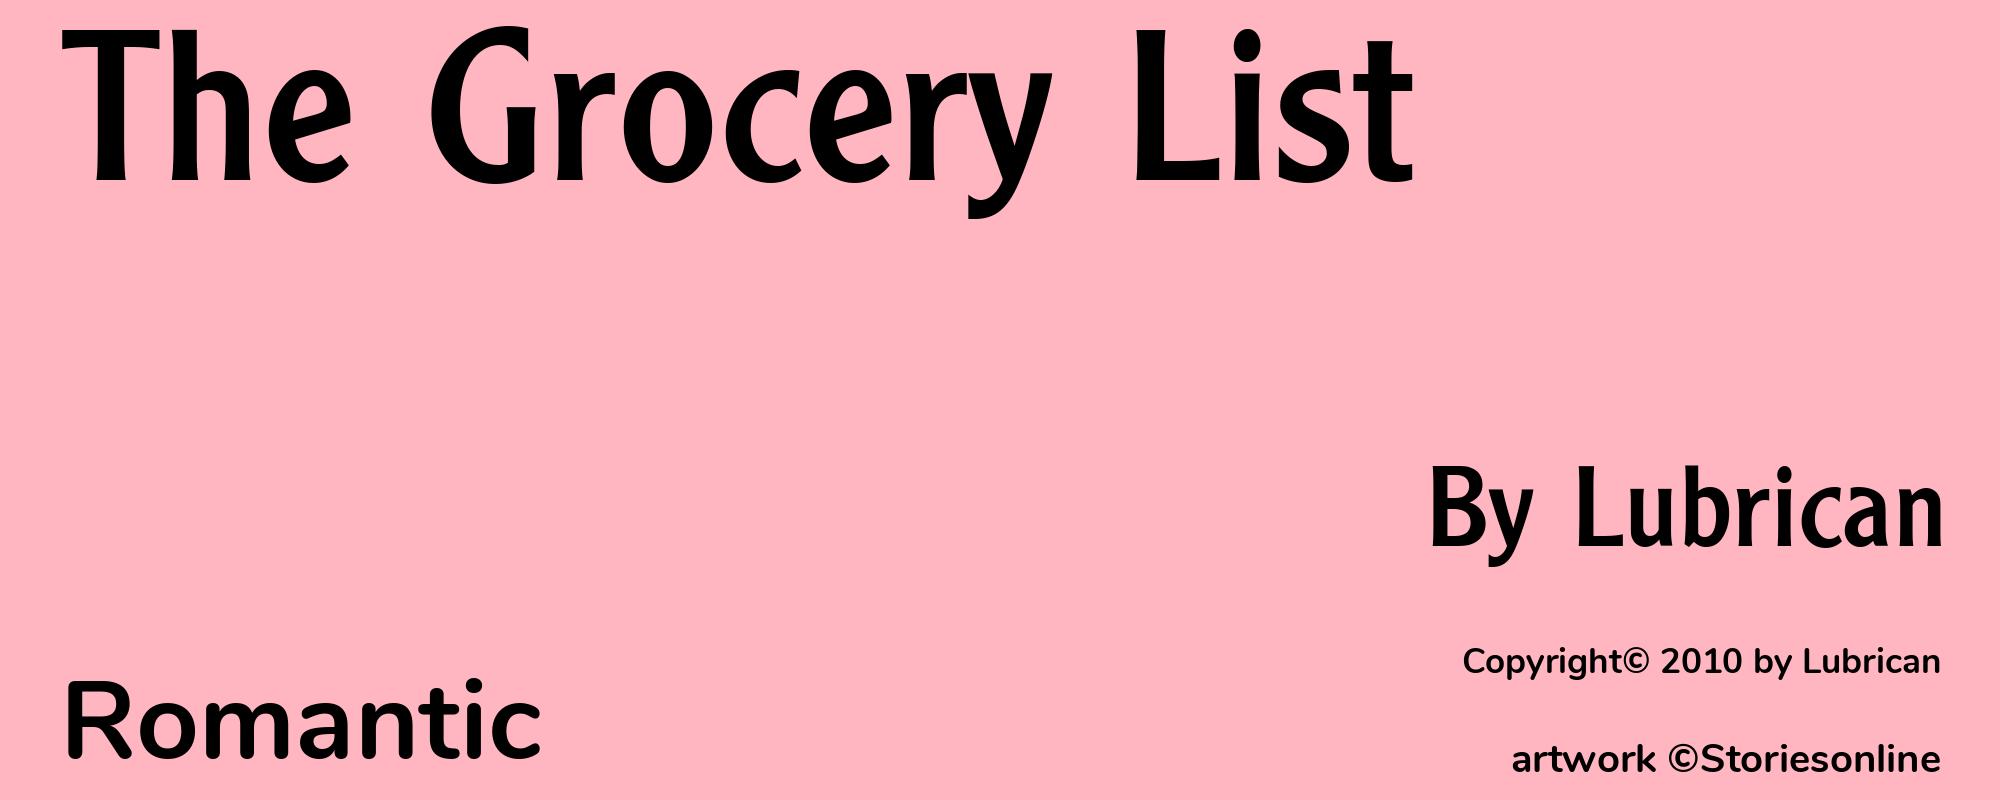 The Grocery List - Cover